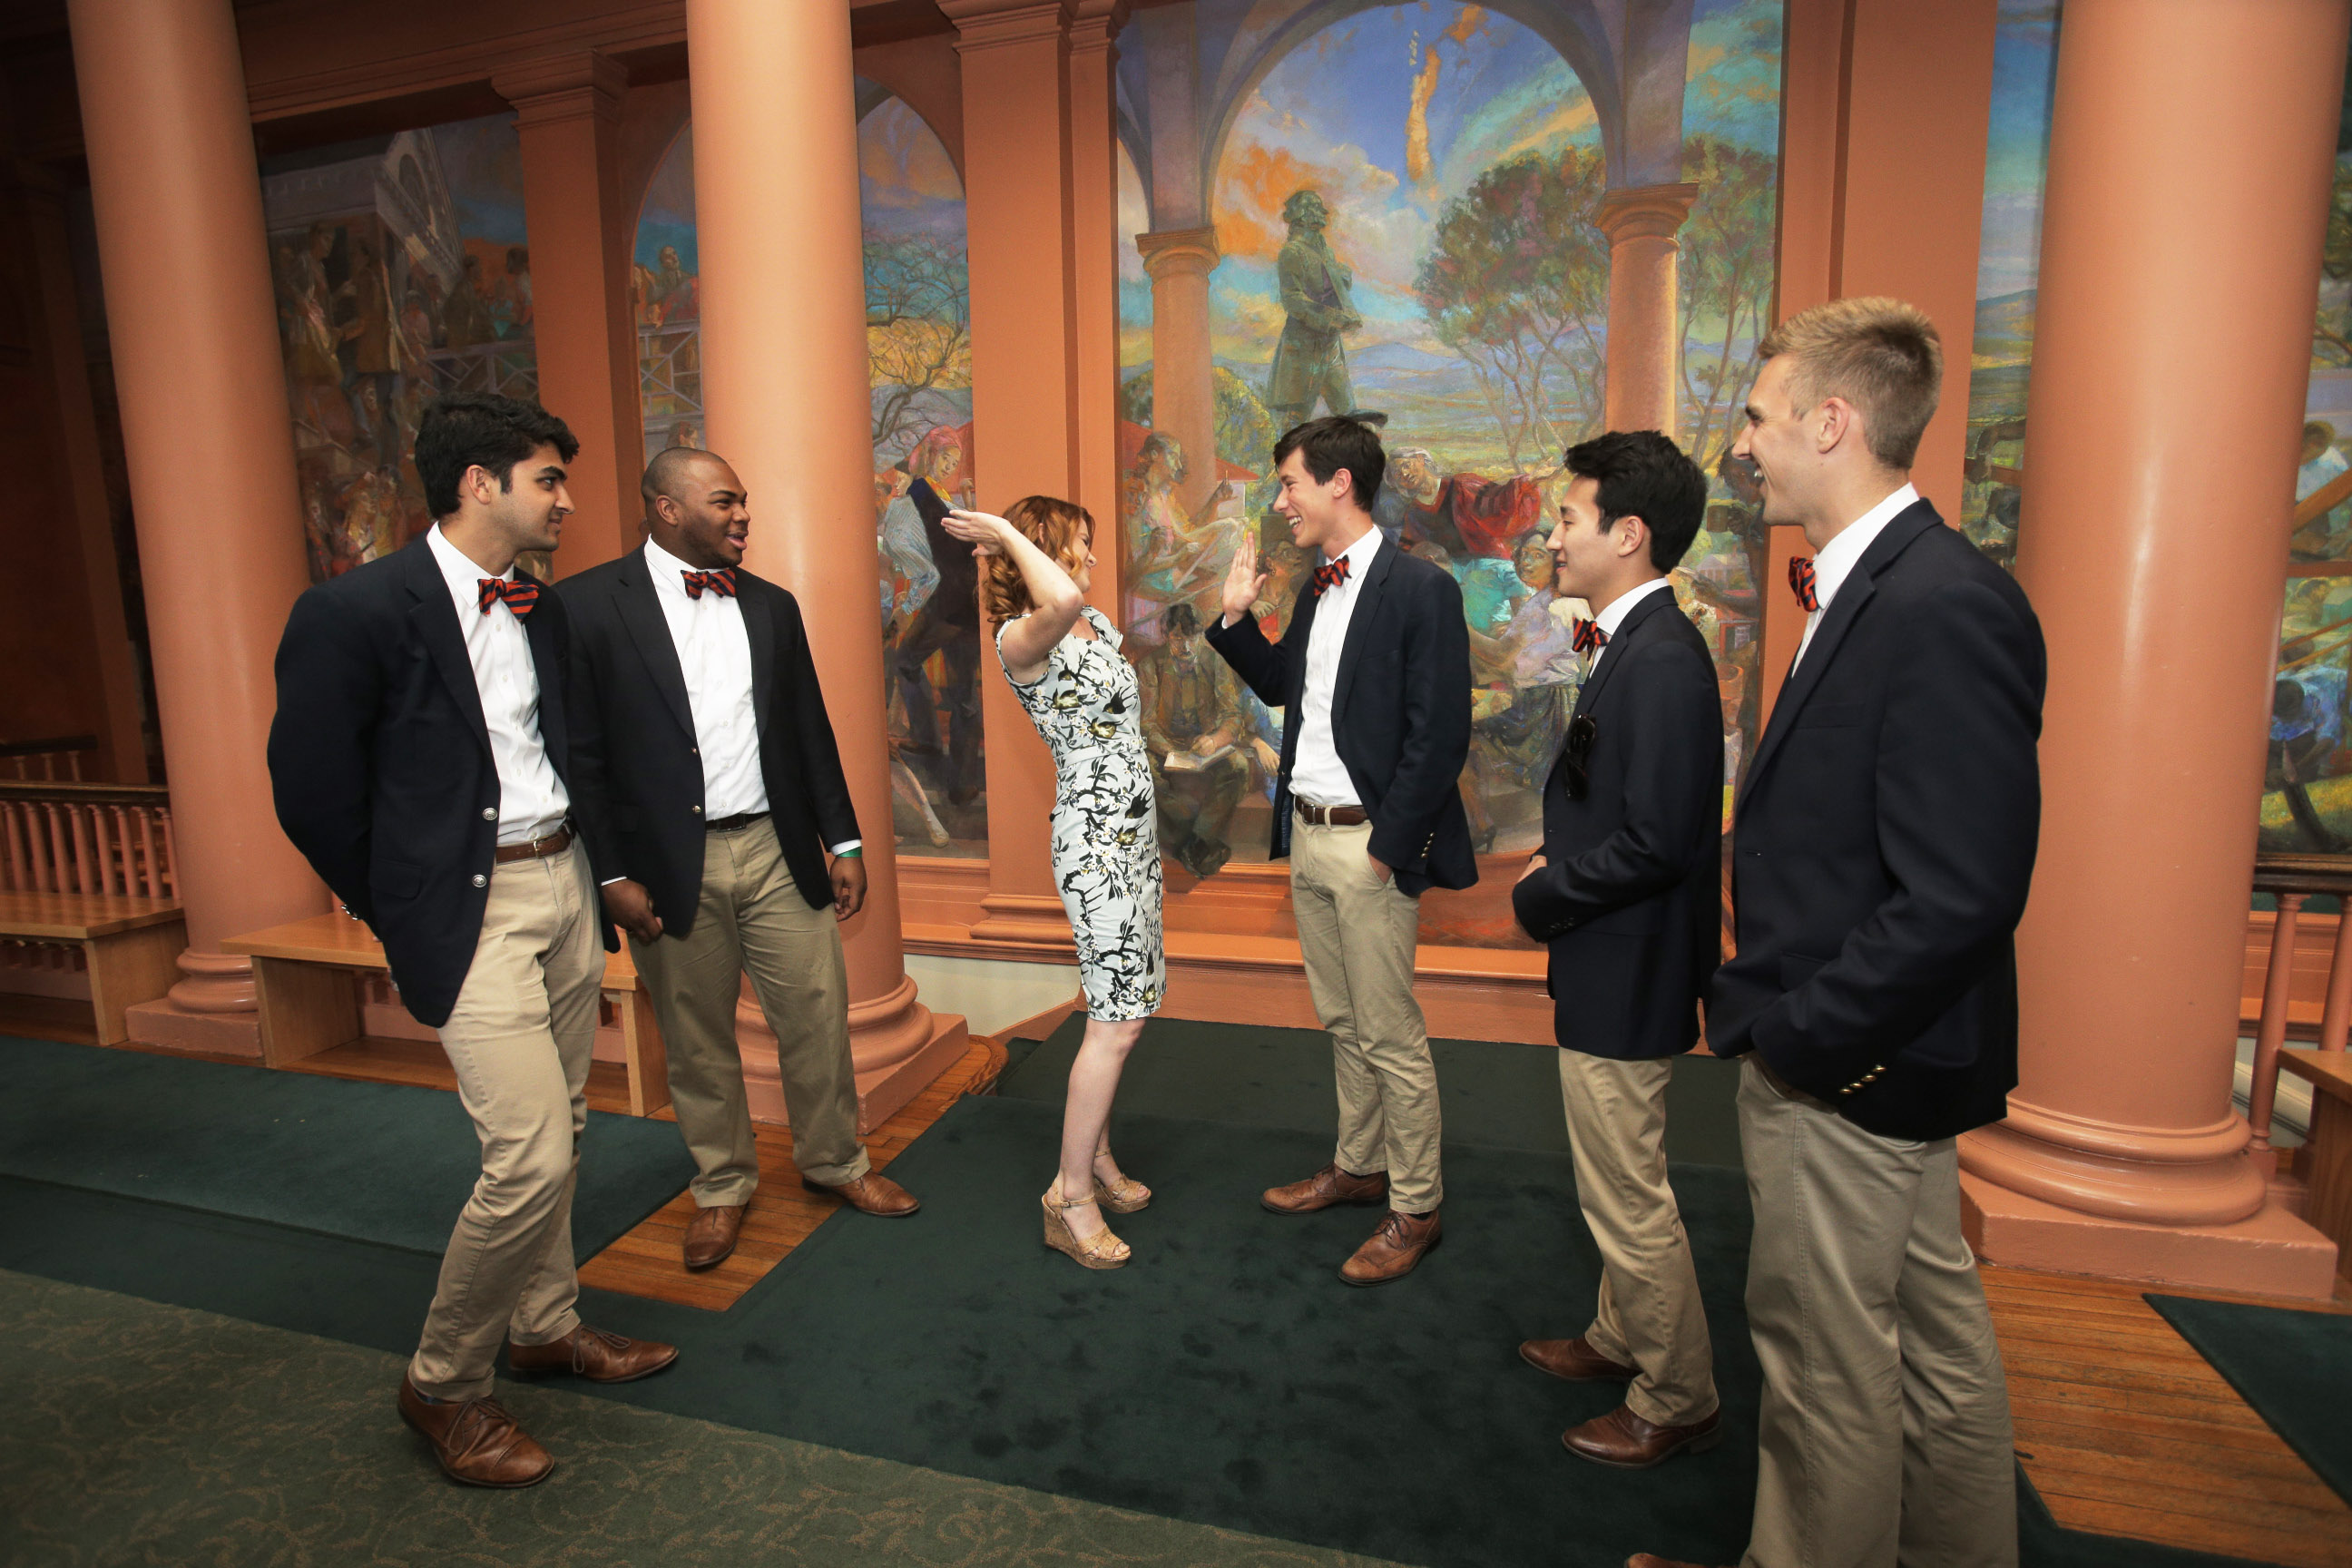 Sarah Drew exchanges a high five with members of the Virginia Gentlemen. (Photos by Sanjay Suchak and Dan Addison)